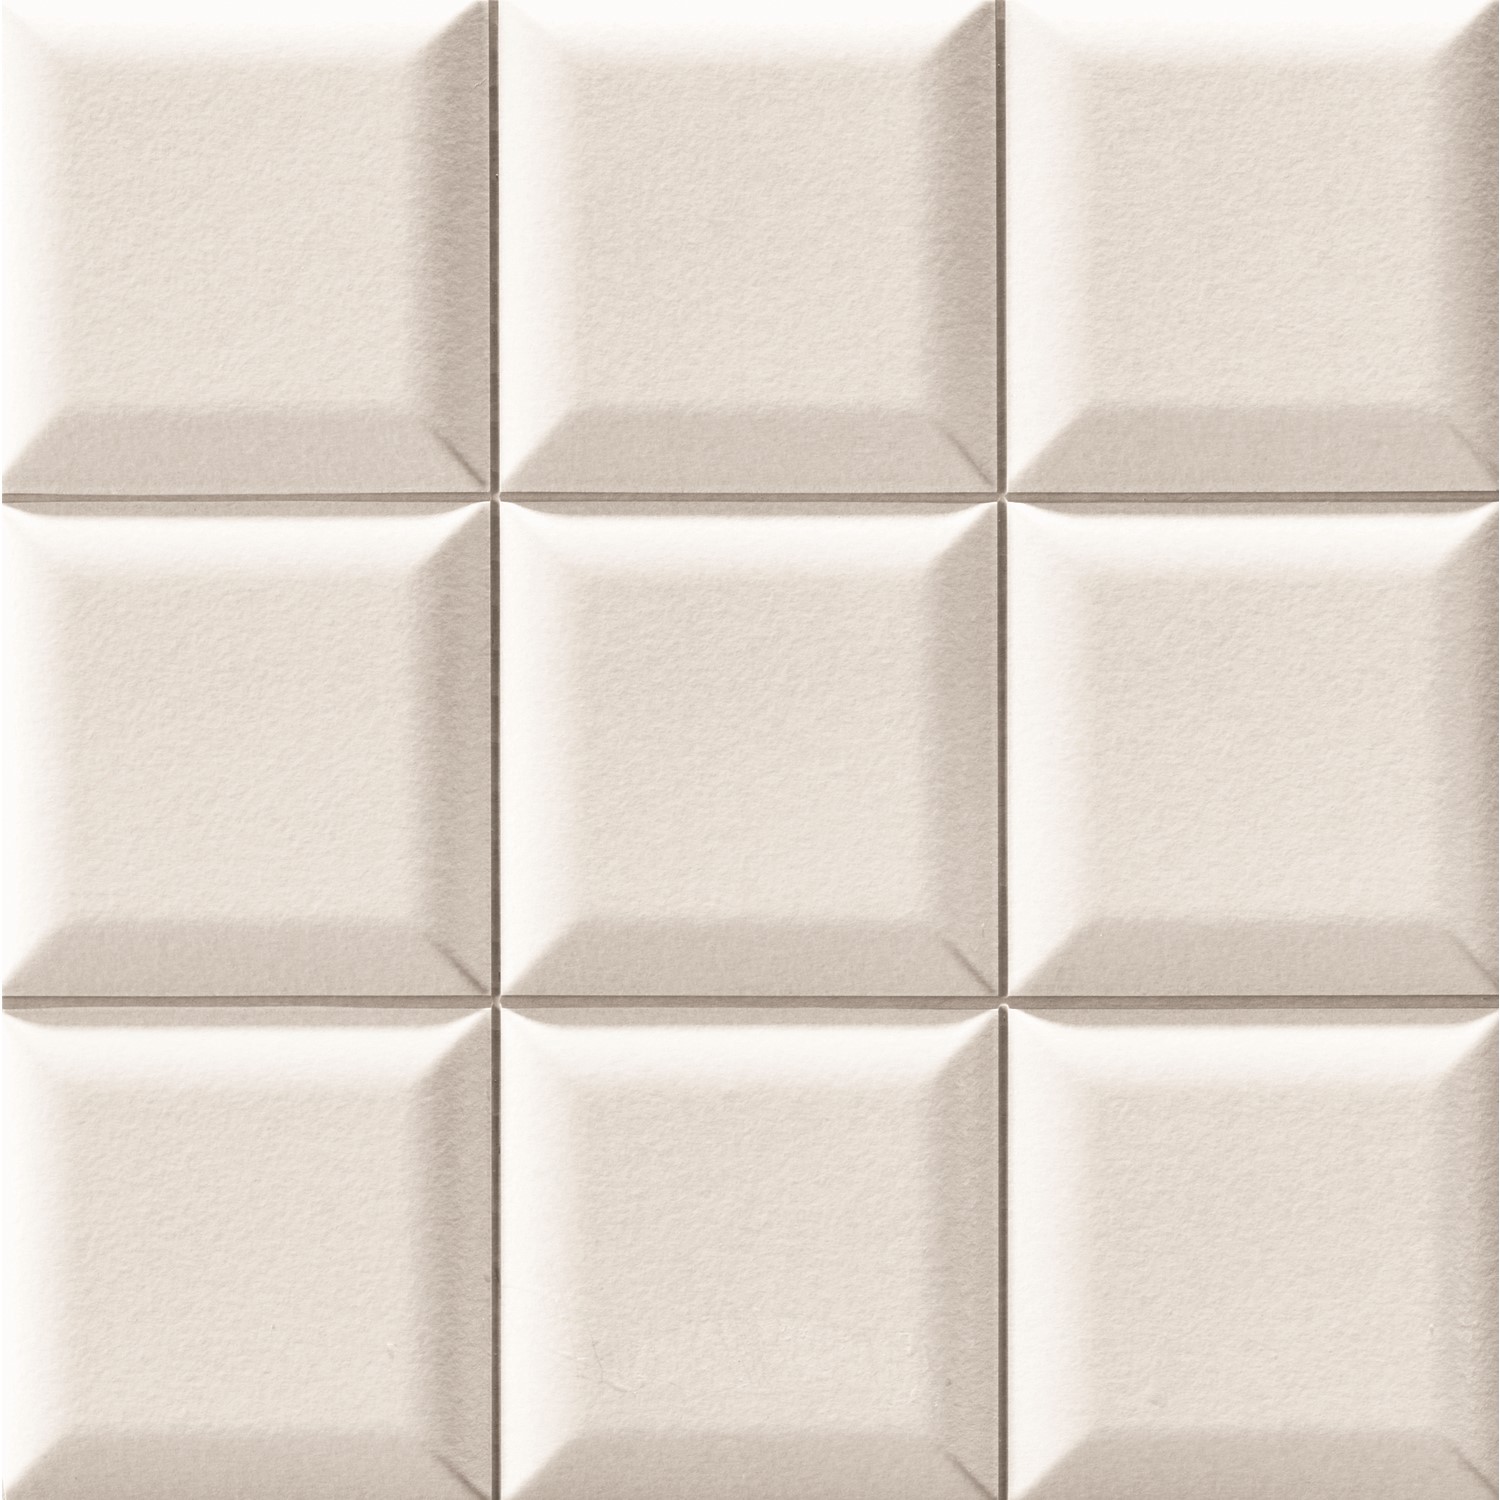 White 3D Effect Wall Tile 33 x 33cm - Almo